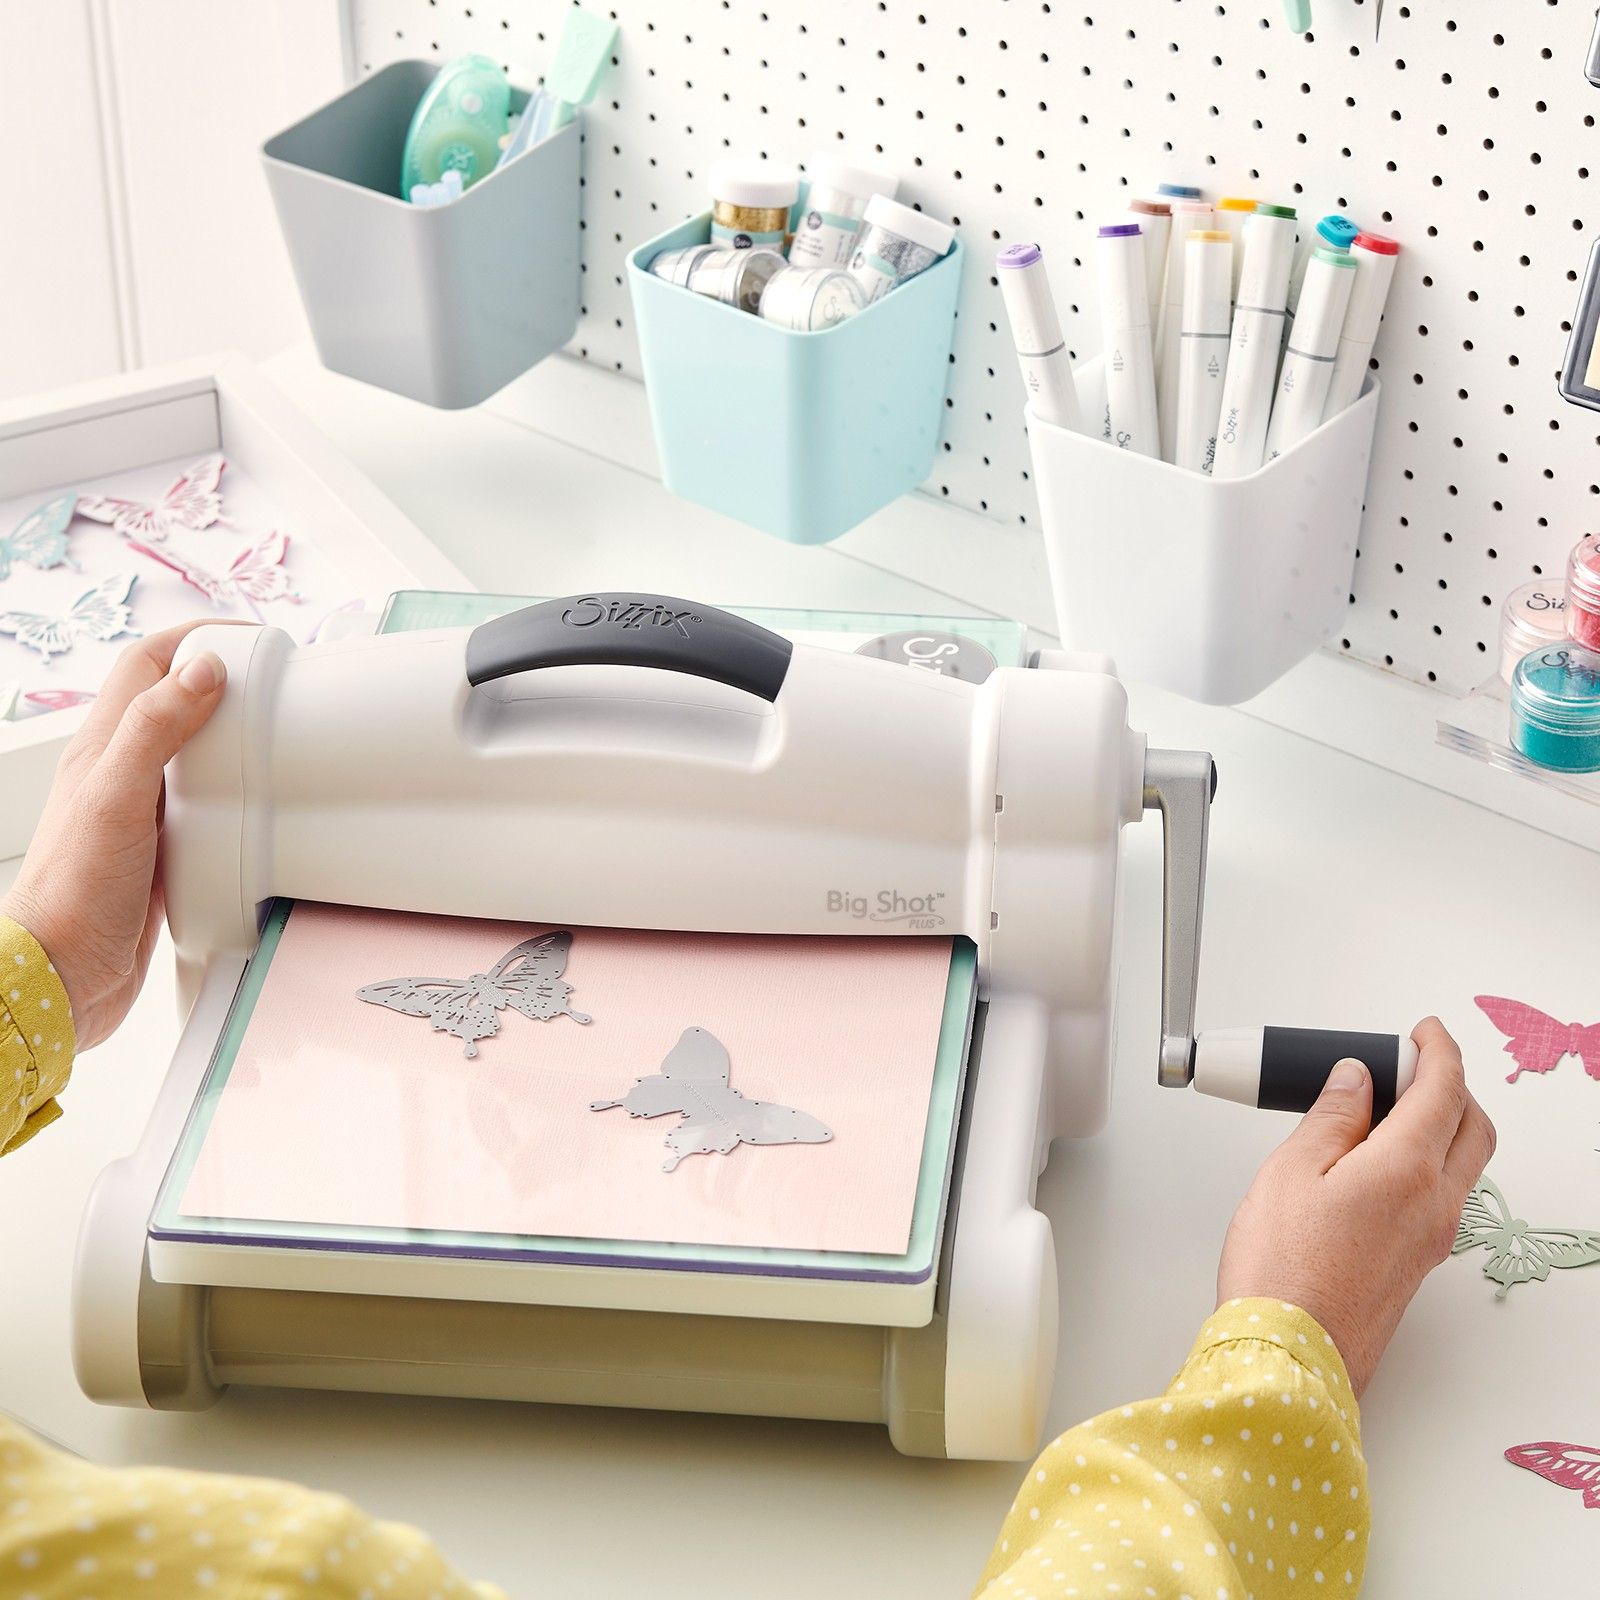 Sizzix • Big shot PLUS A4 – Our Craft Room